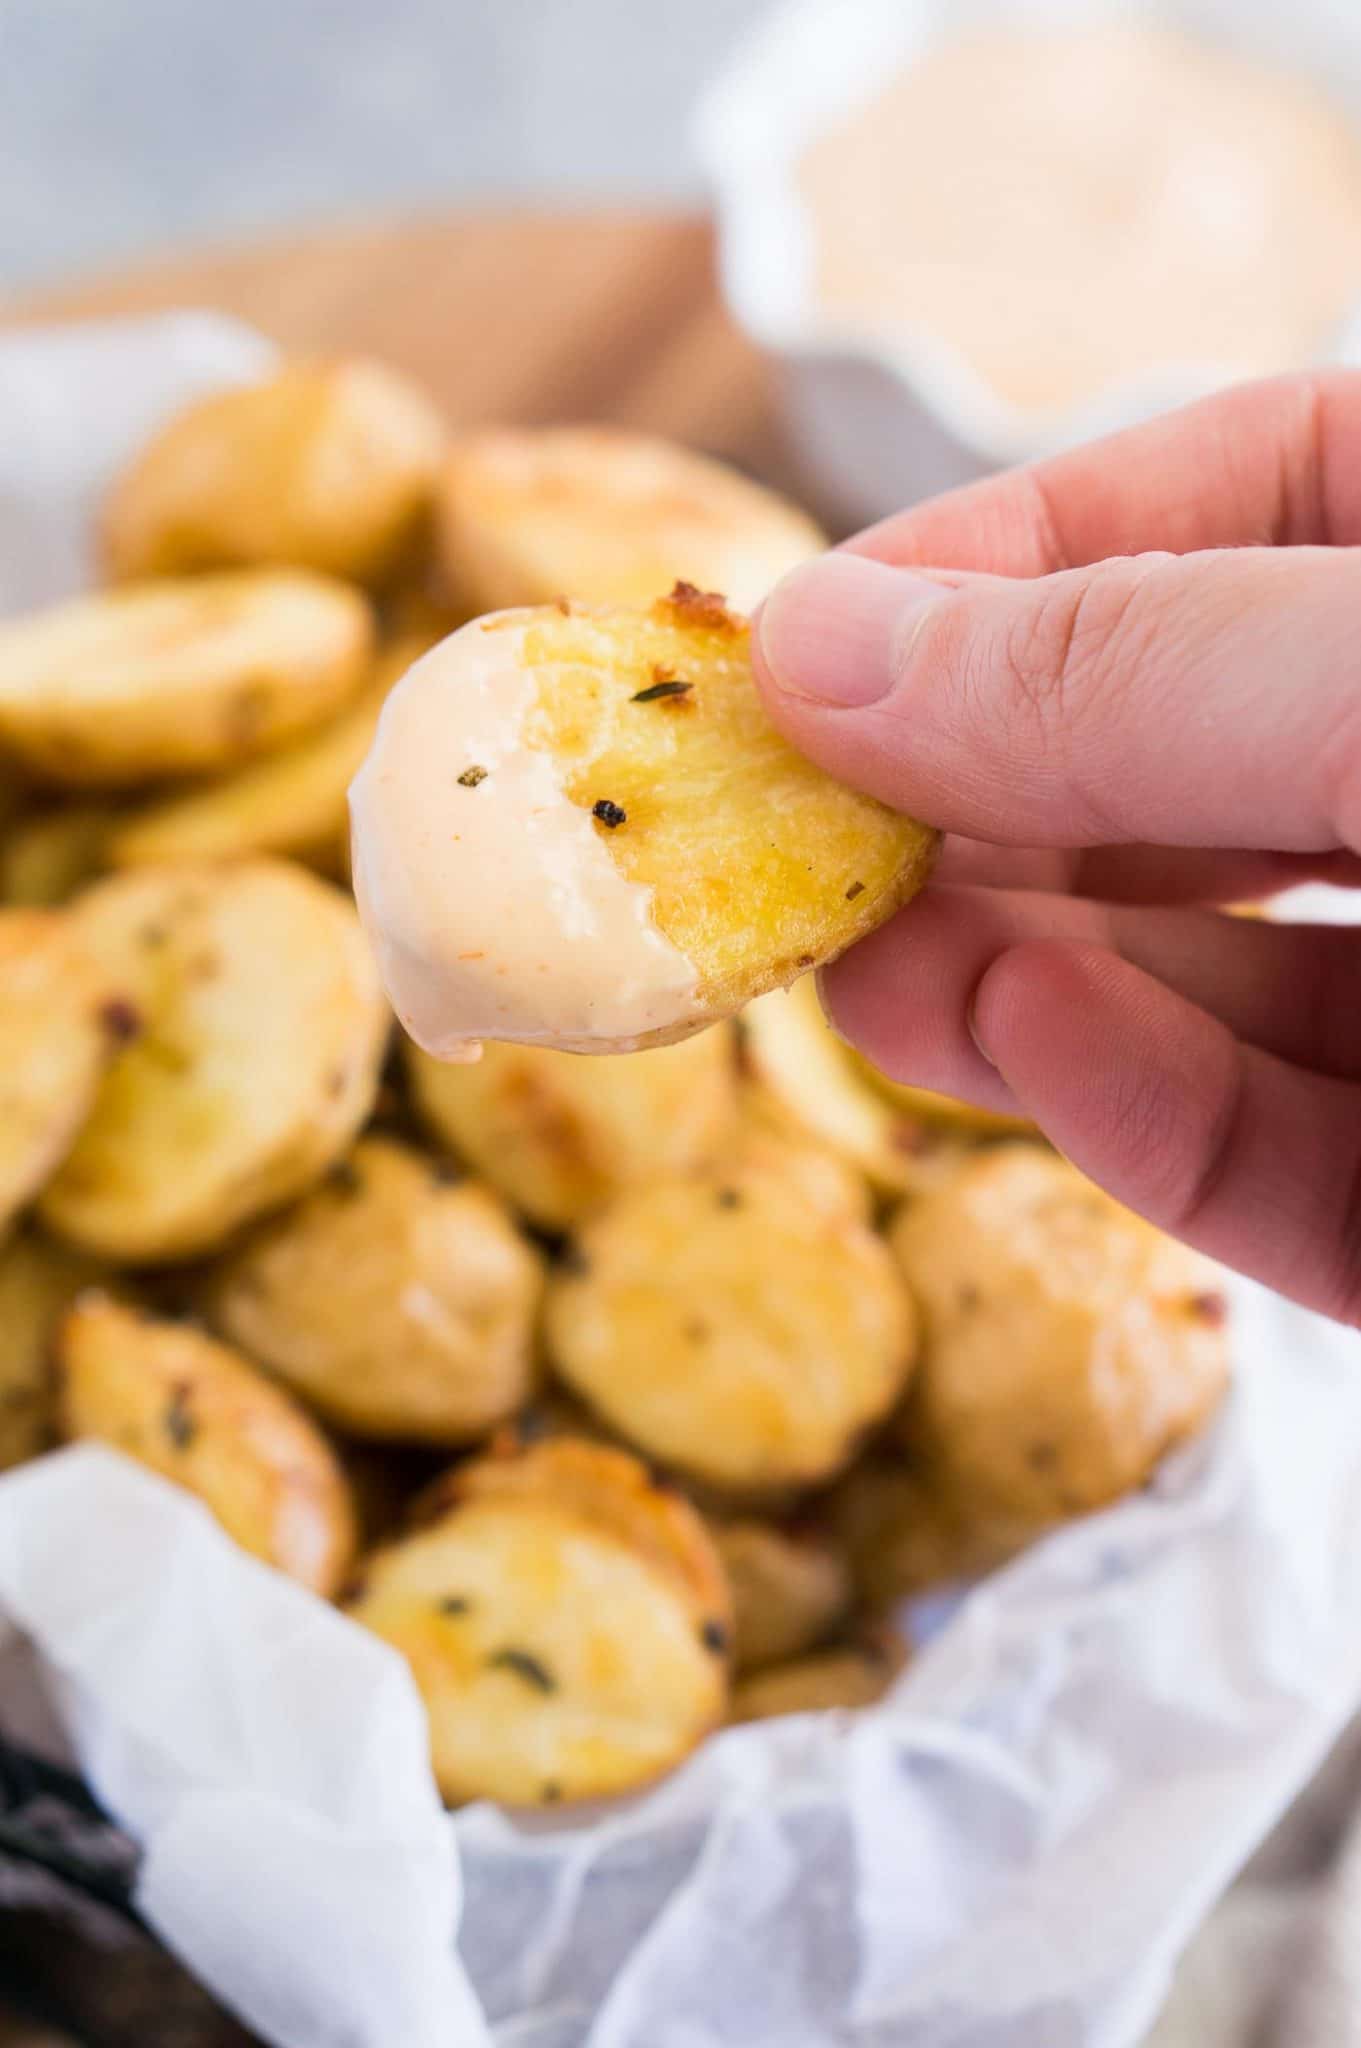 dipping roasted potatoes in a sauce